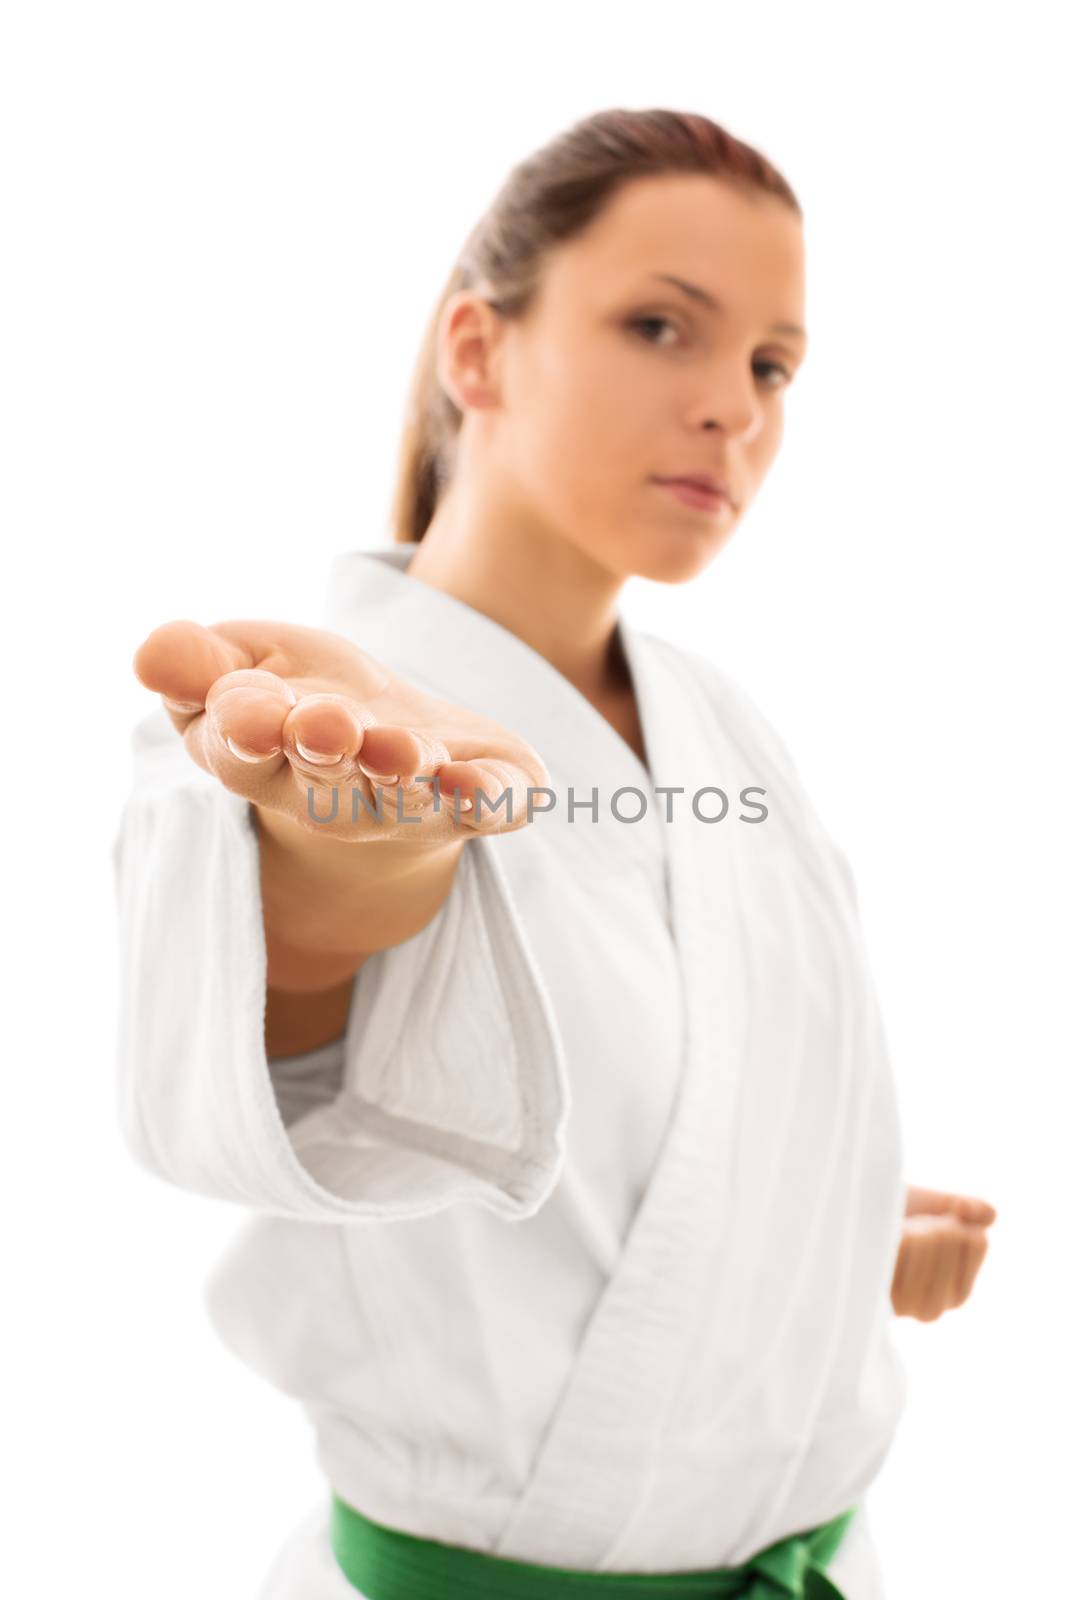 Bring it. Beautiful young girl in kimono with green belt taunting you, isolated on white background.